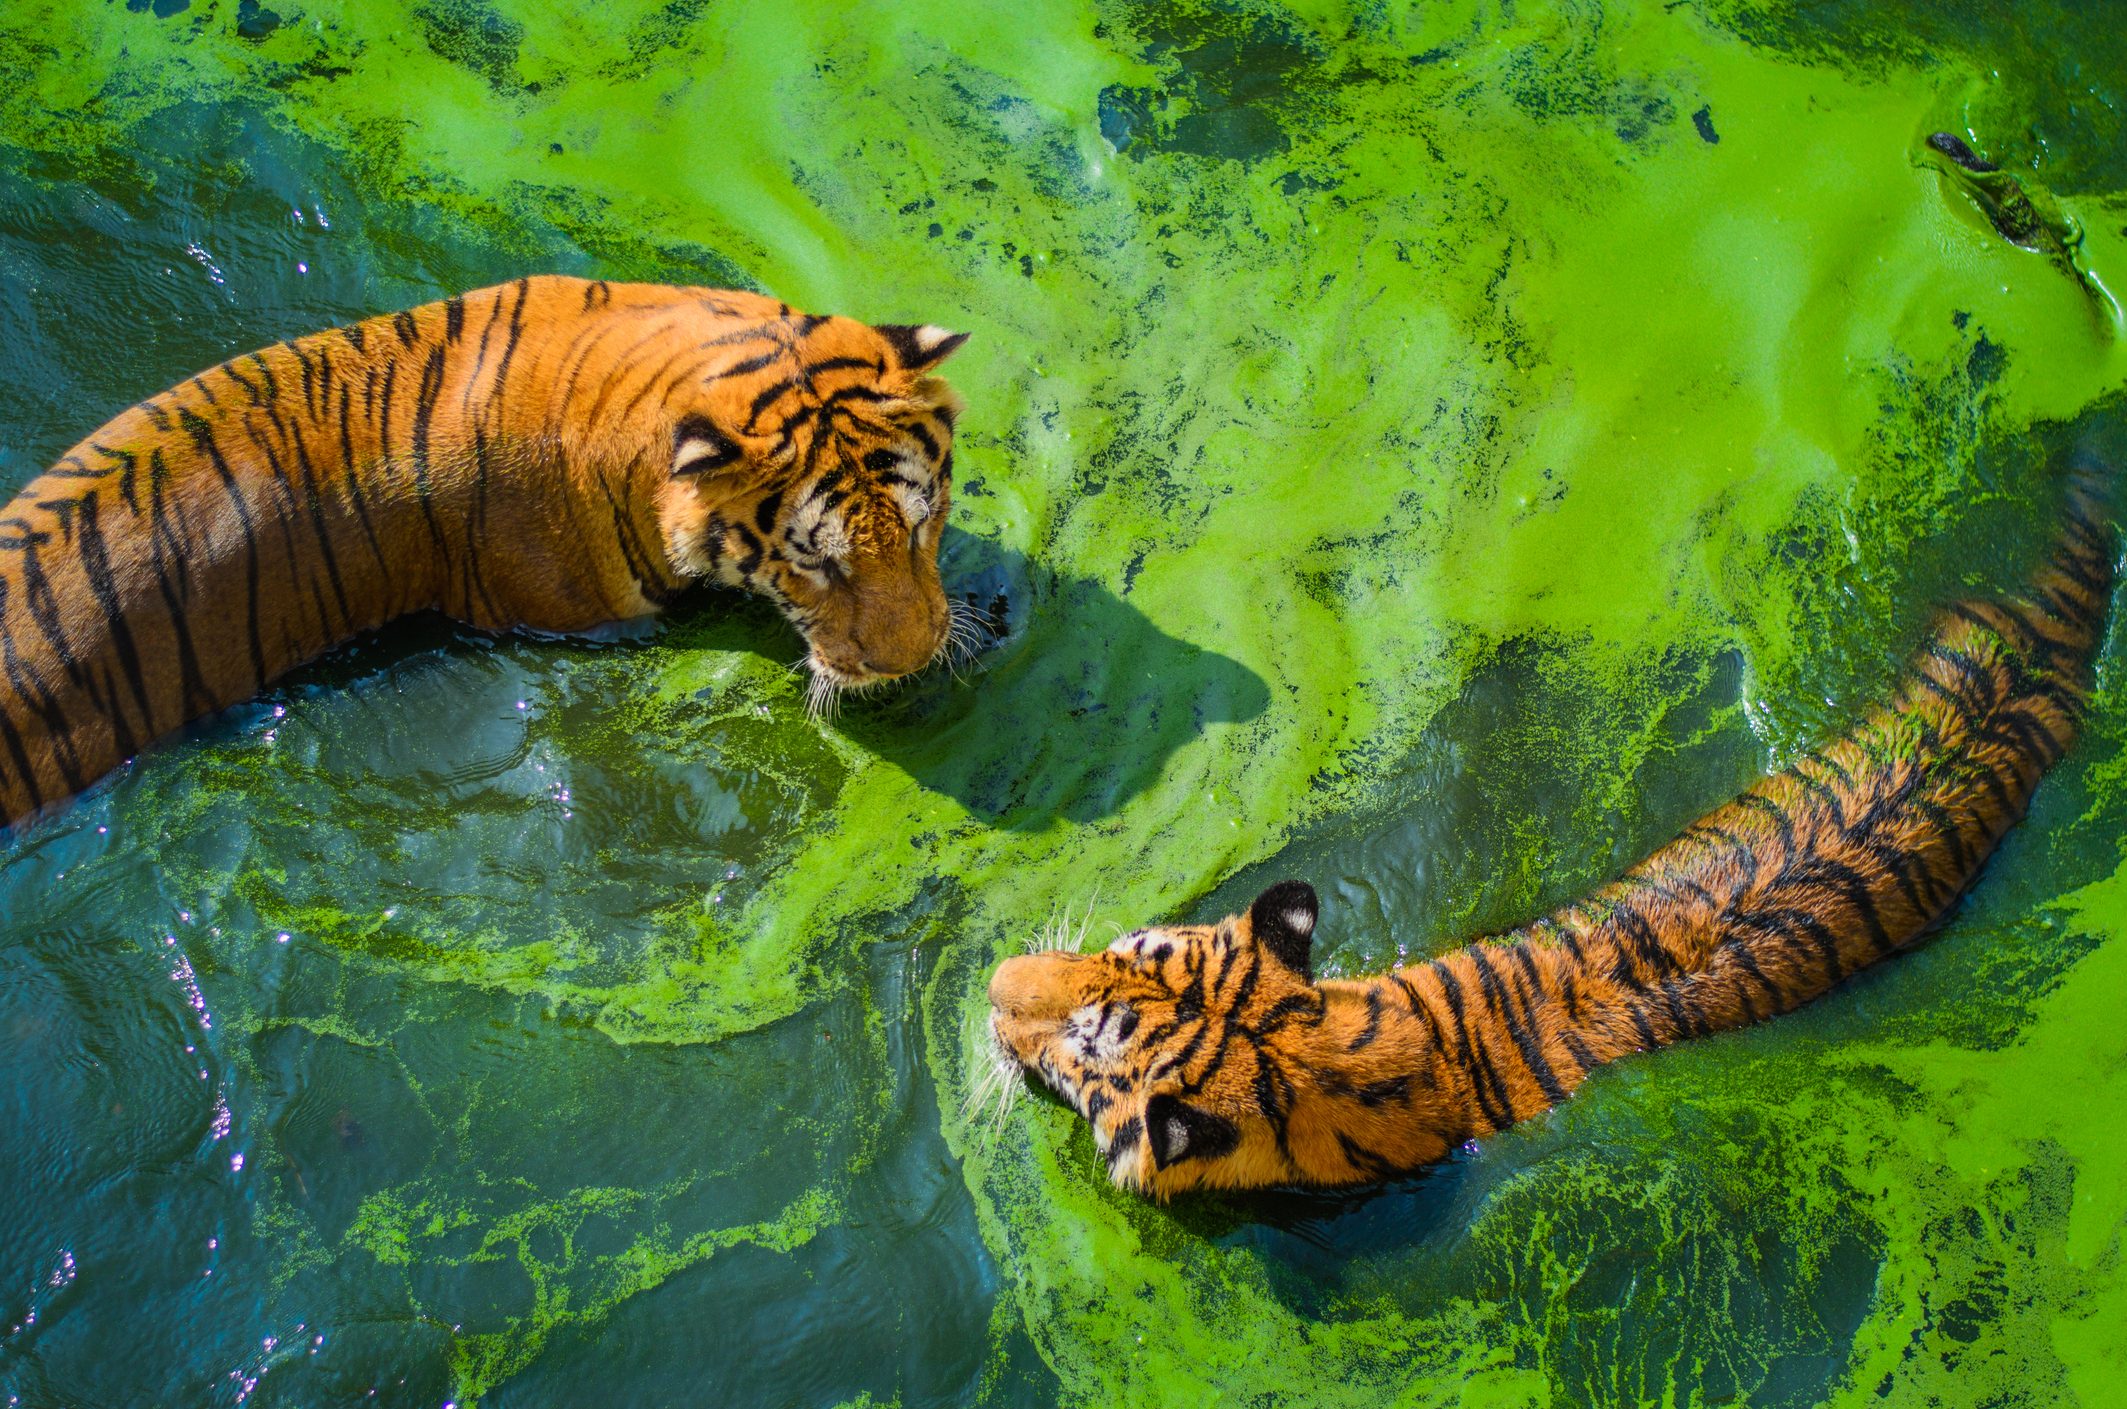 High Angle View Of Tigers In Swamp At Forest